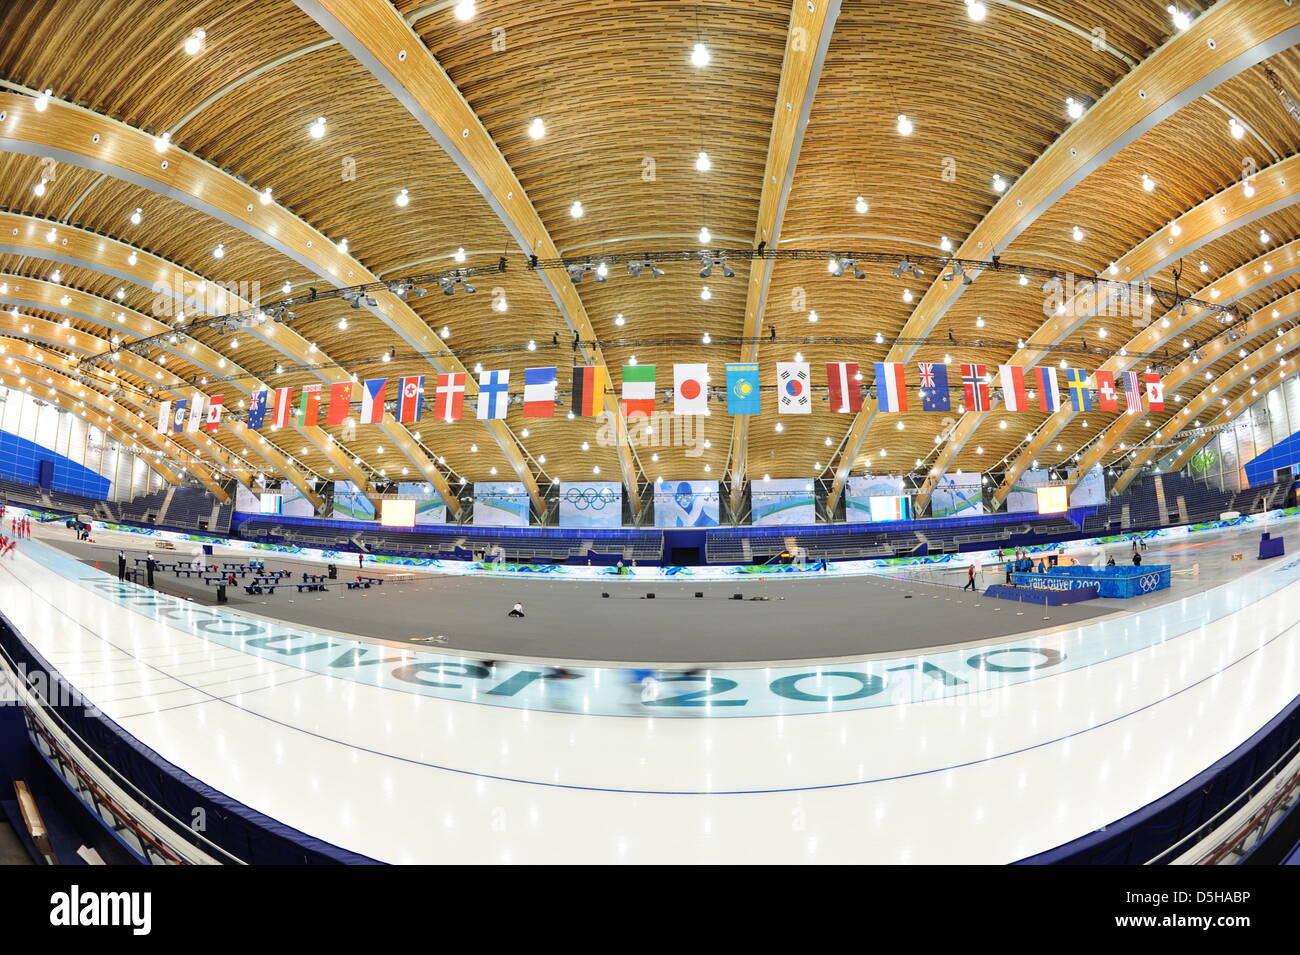 The Richmond Olympic Oval in Richmond, British Columbia, Canada, 04 February 2010. Canada's third biggest city Vancouver will host the 2010 Winter Olympic Games from February 12 - 28 February 2010. Photo: Peter Kneffel  +++(c) dpa - Bildfunk+++ Stock Photo